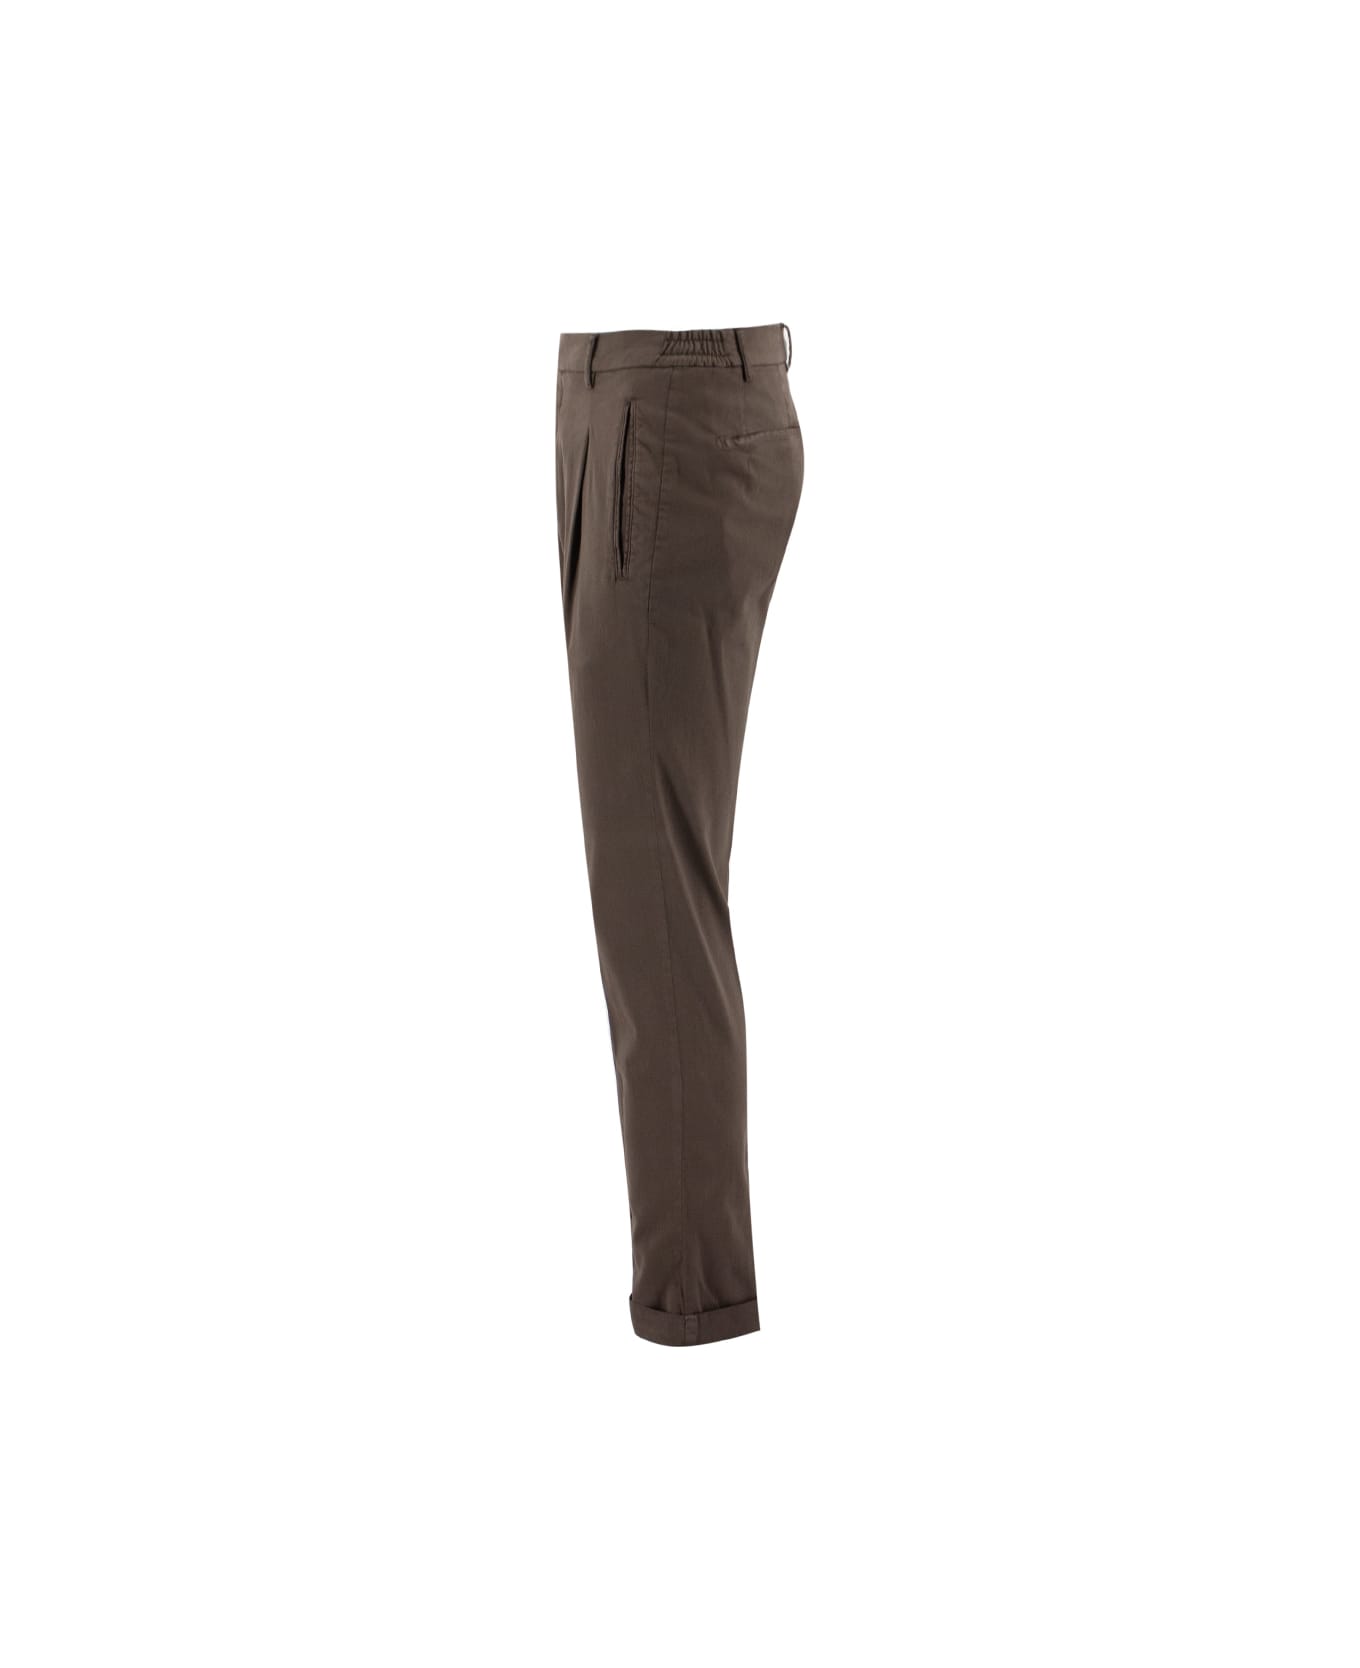 Berwich Trousers - BROWN ボトムス